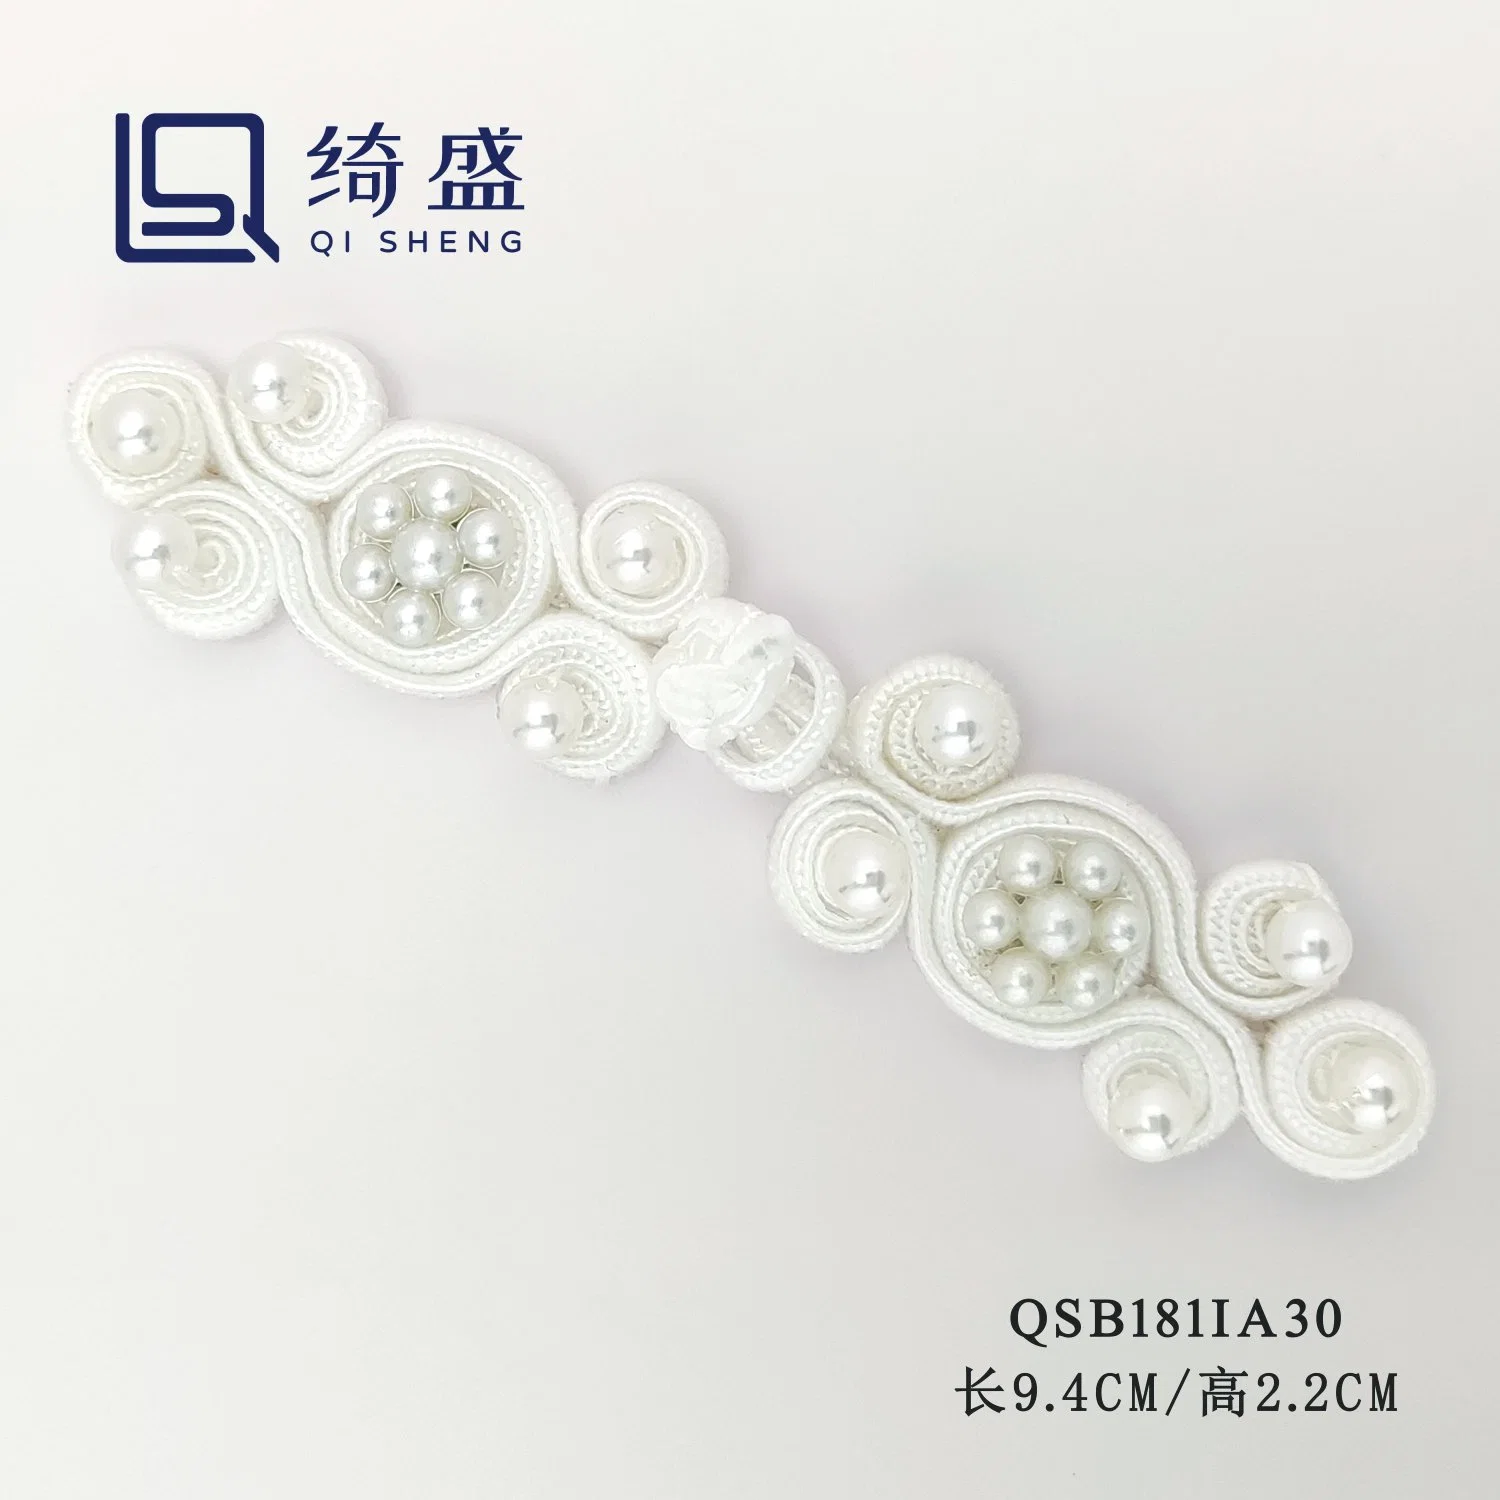 Chinese Style Custom Buttons/Chinese Knot Button/White Color Chinese Knot Button with Pearl